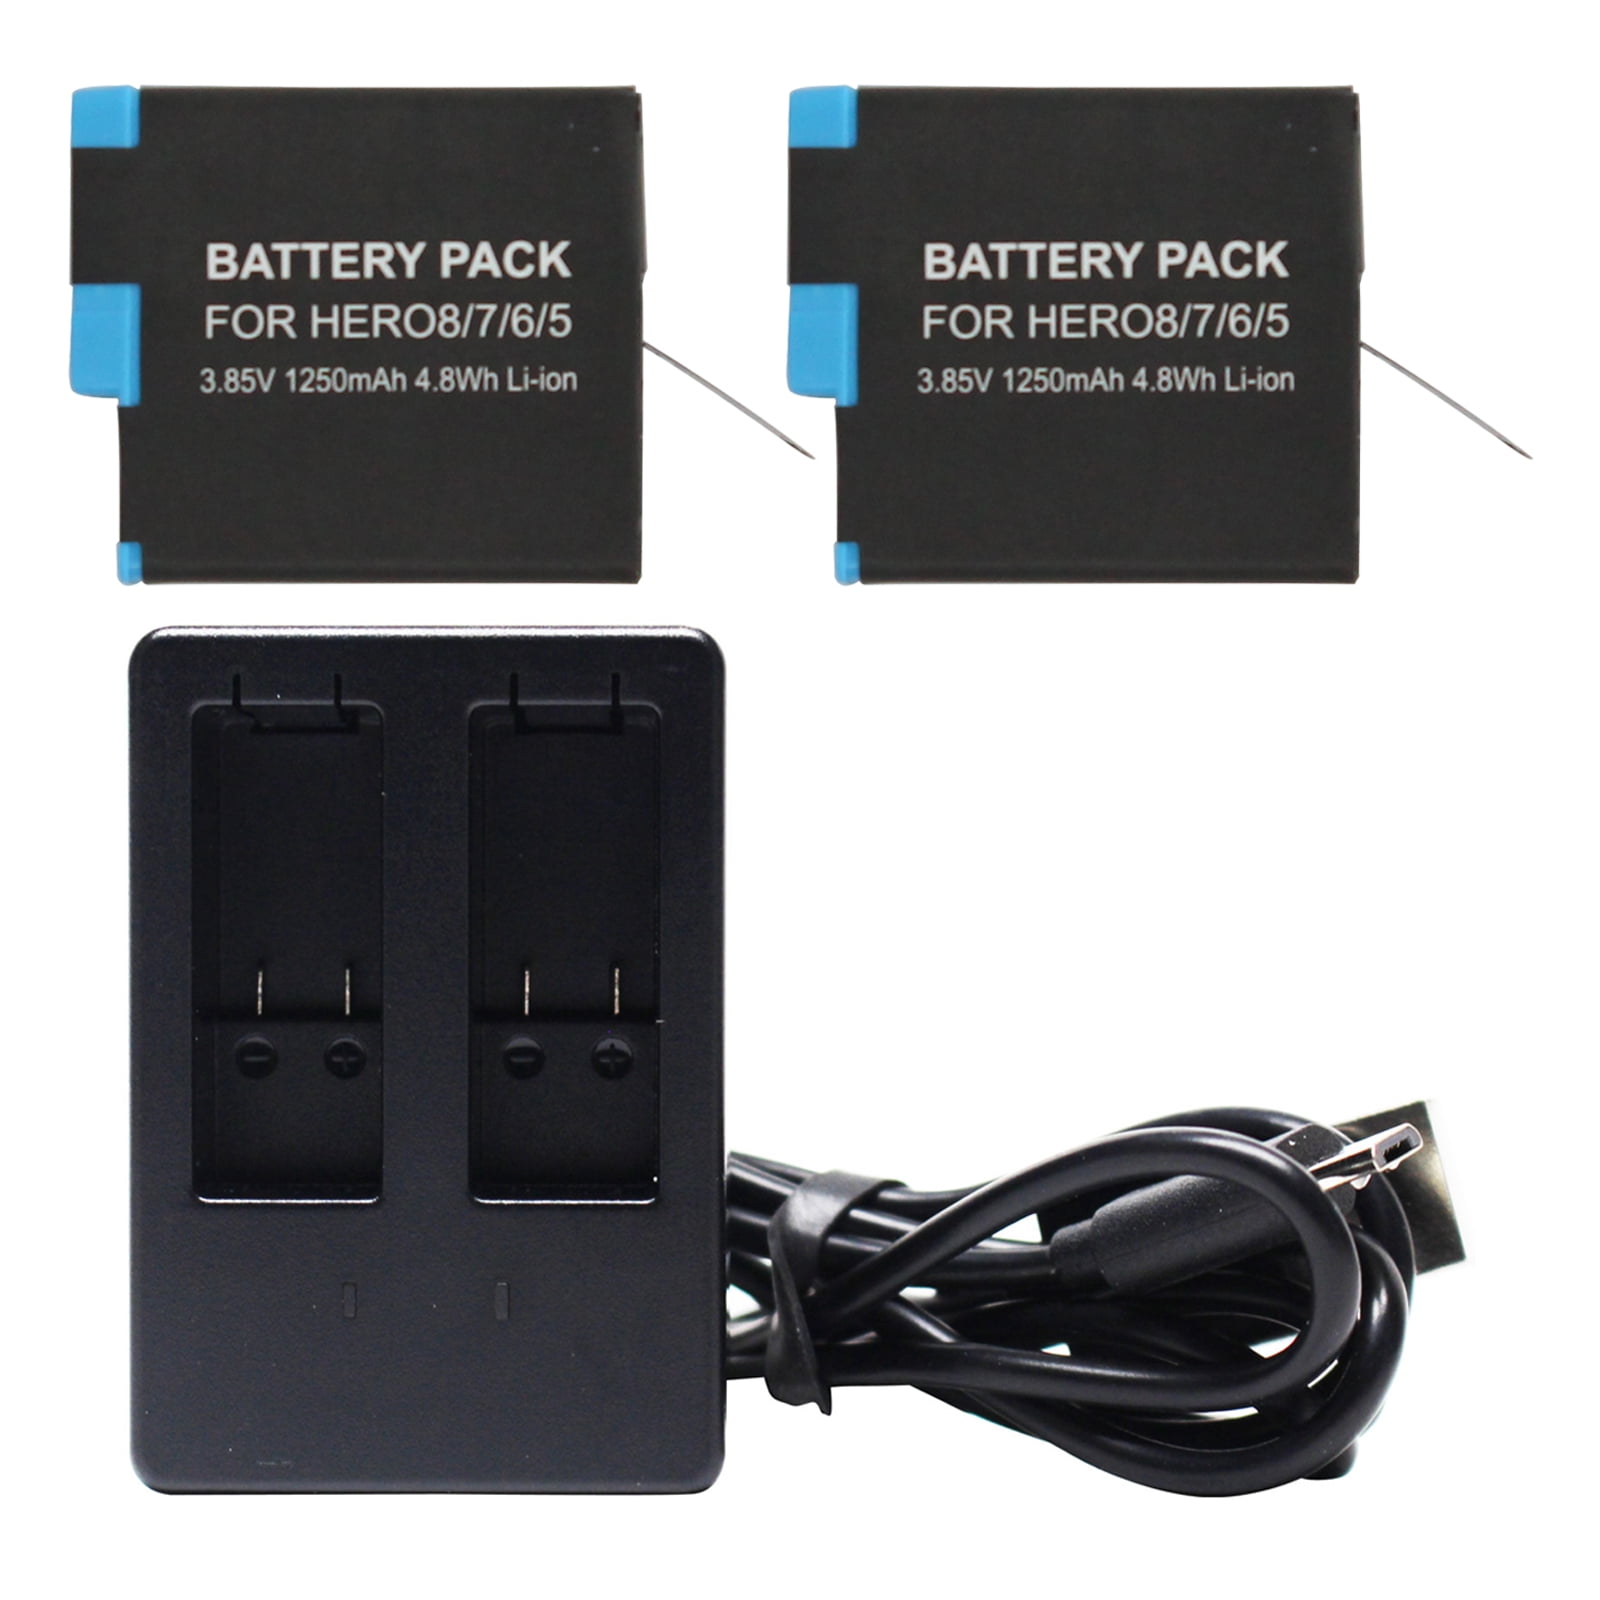 2-Pack AHDBT-801 Battery & 1 Charger Replacement for GoPro Hero 7 HD Black Camera - Compatible with SPJB1B Fully Decoded Battery & Charger - image 1 of 3